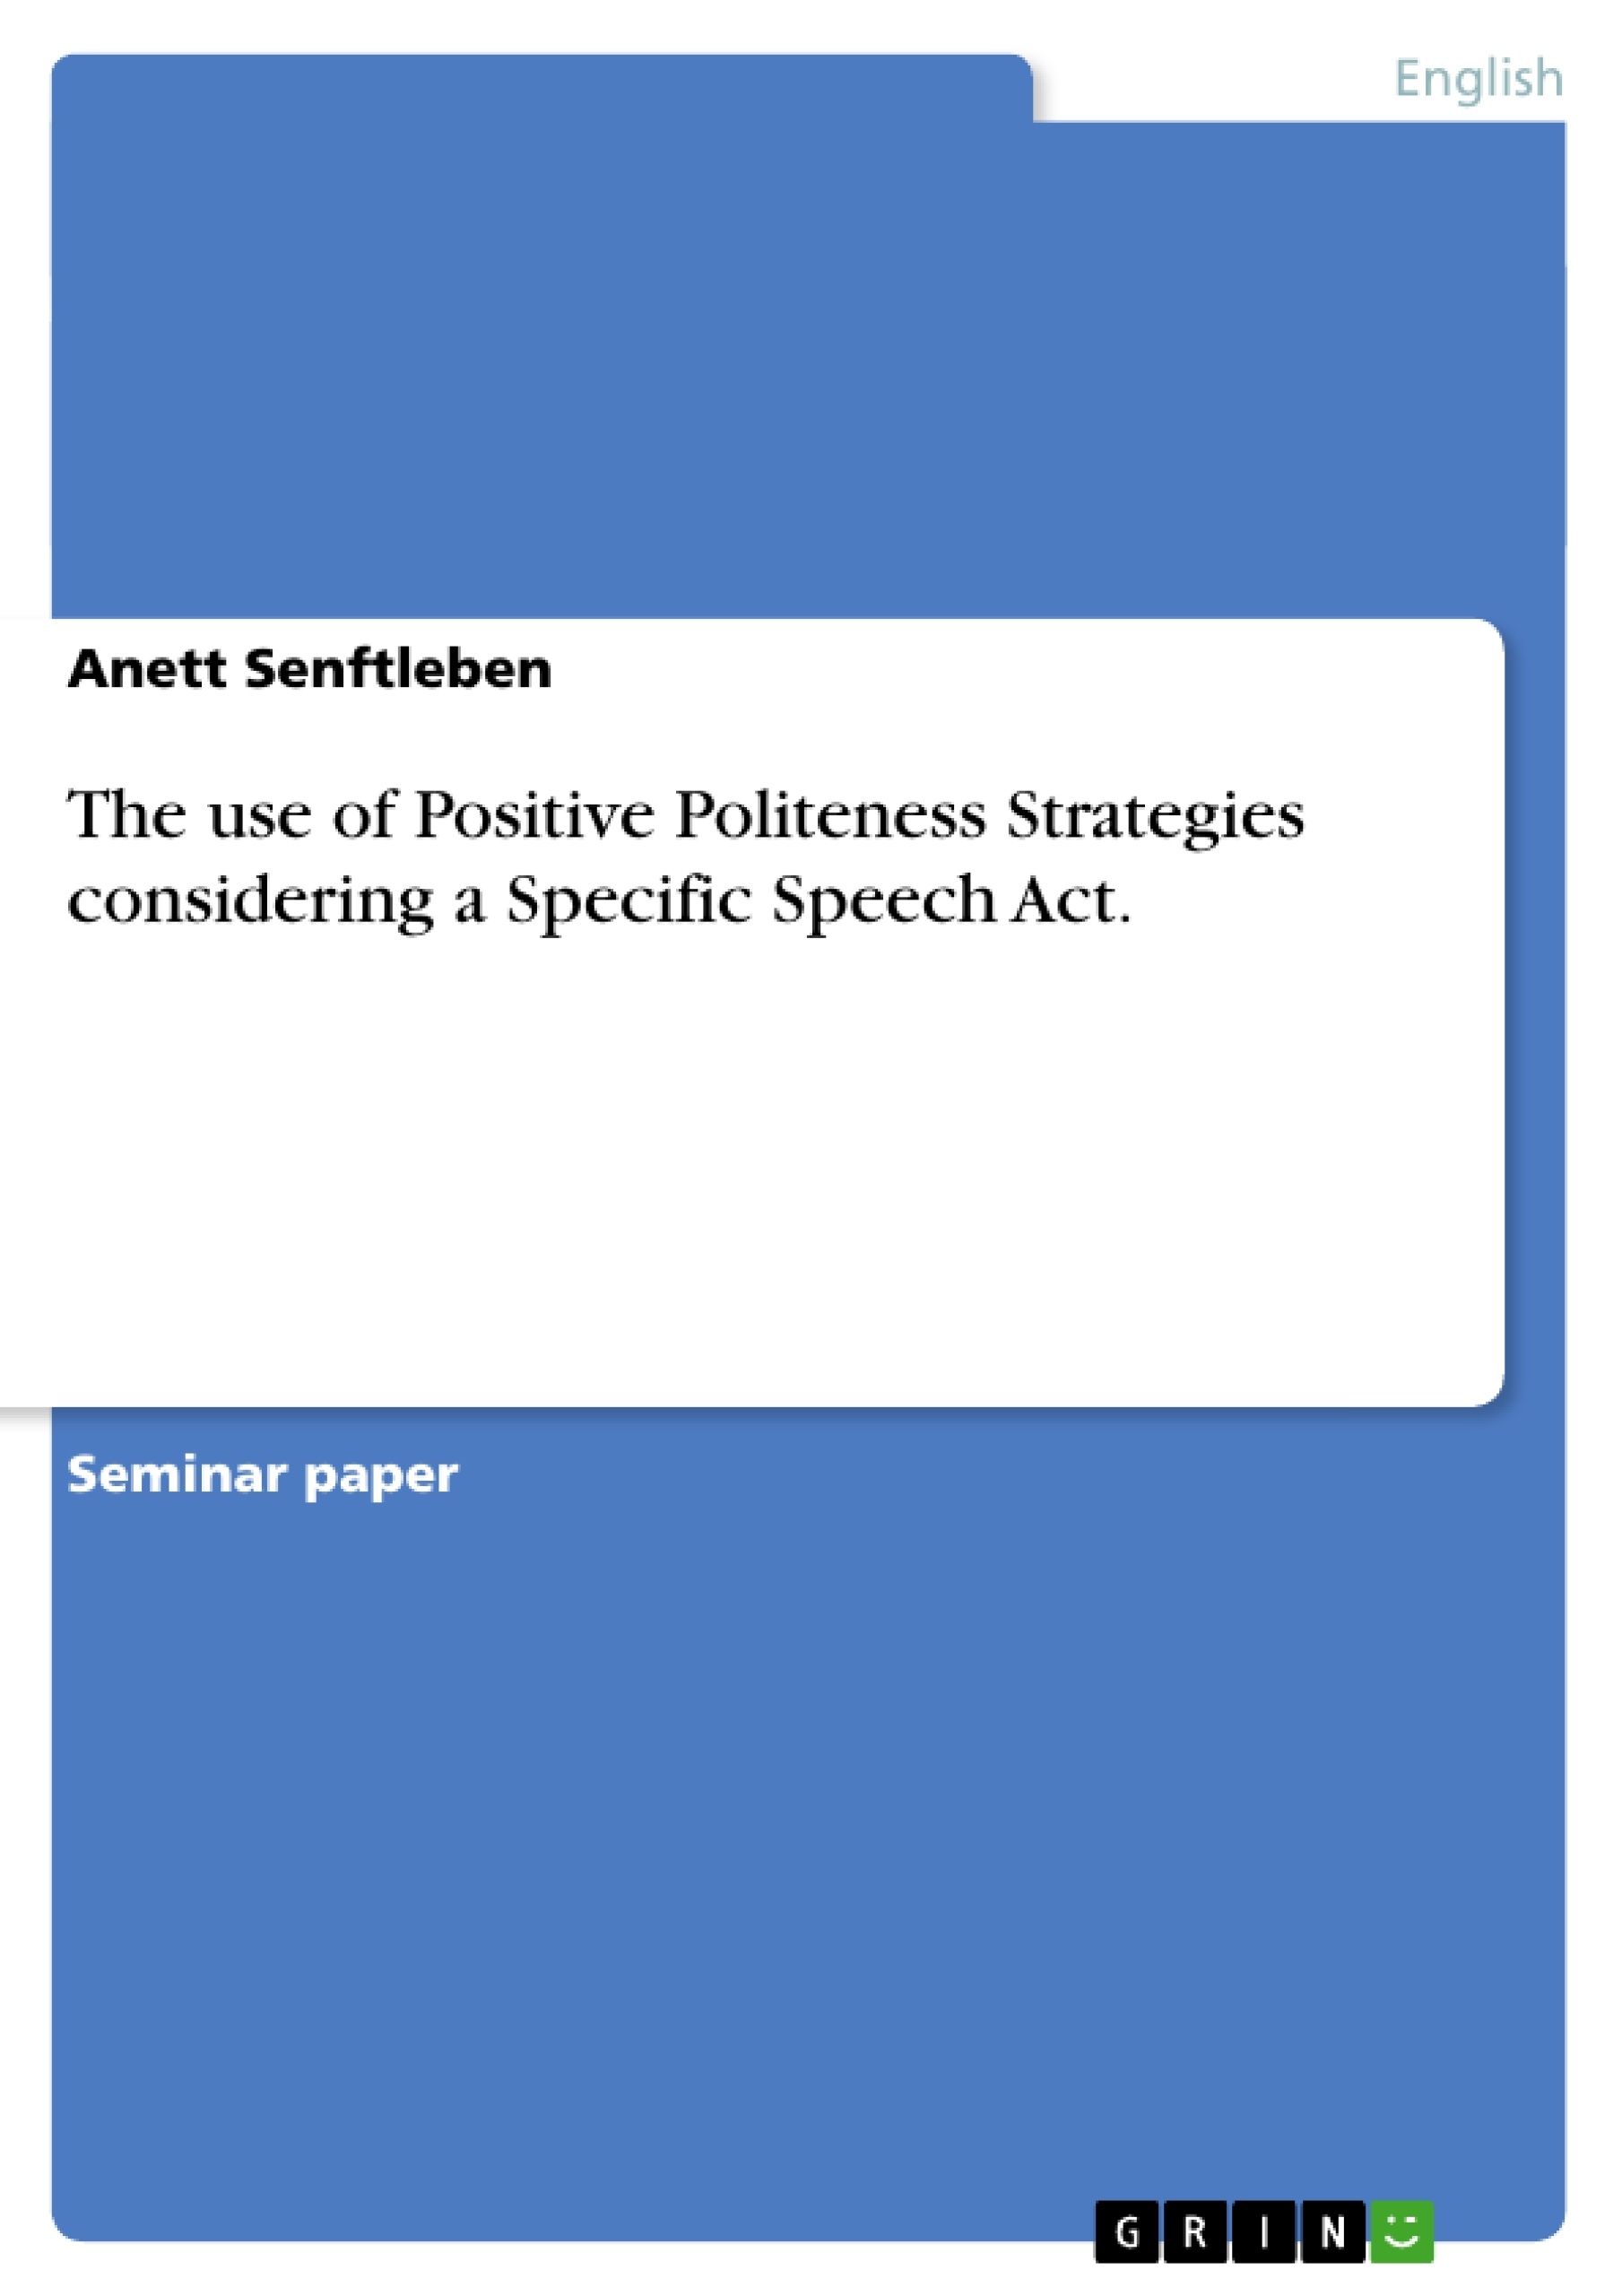 Title: The use of Positive Politeness Strategies considering a Specific Speech Act.